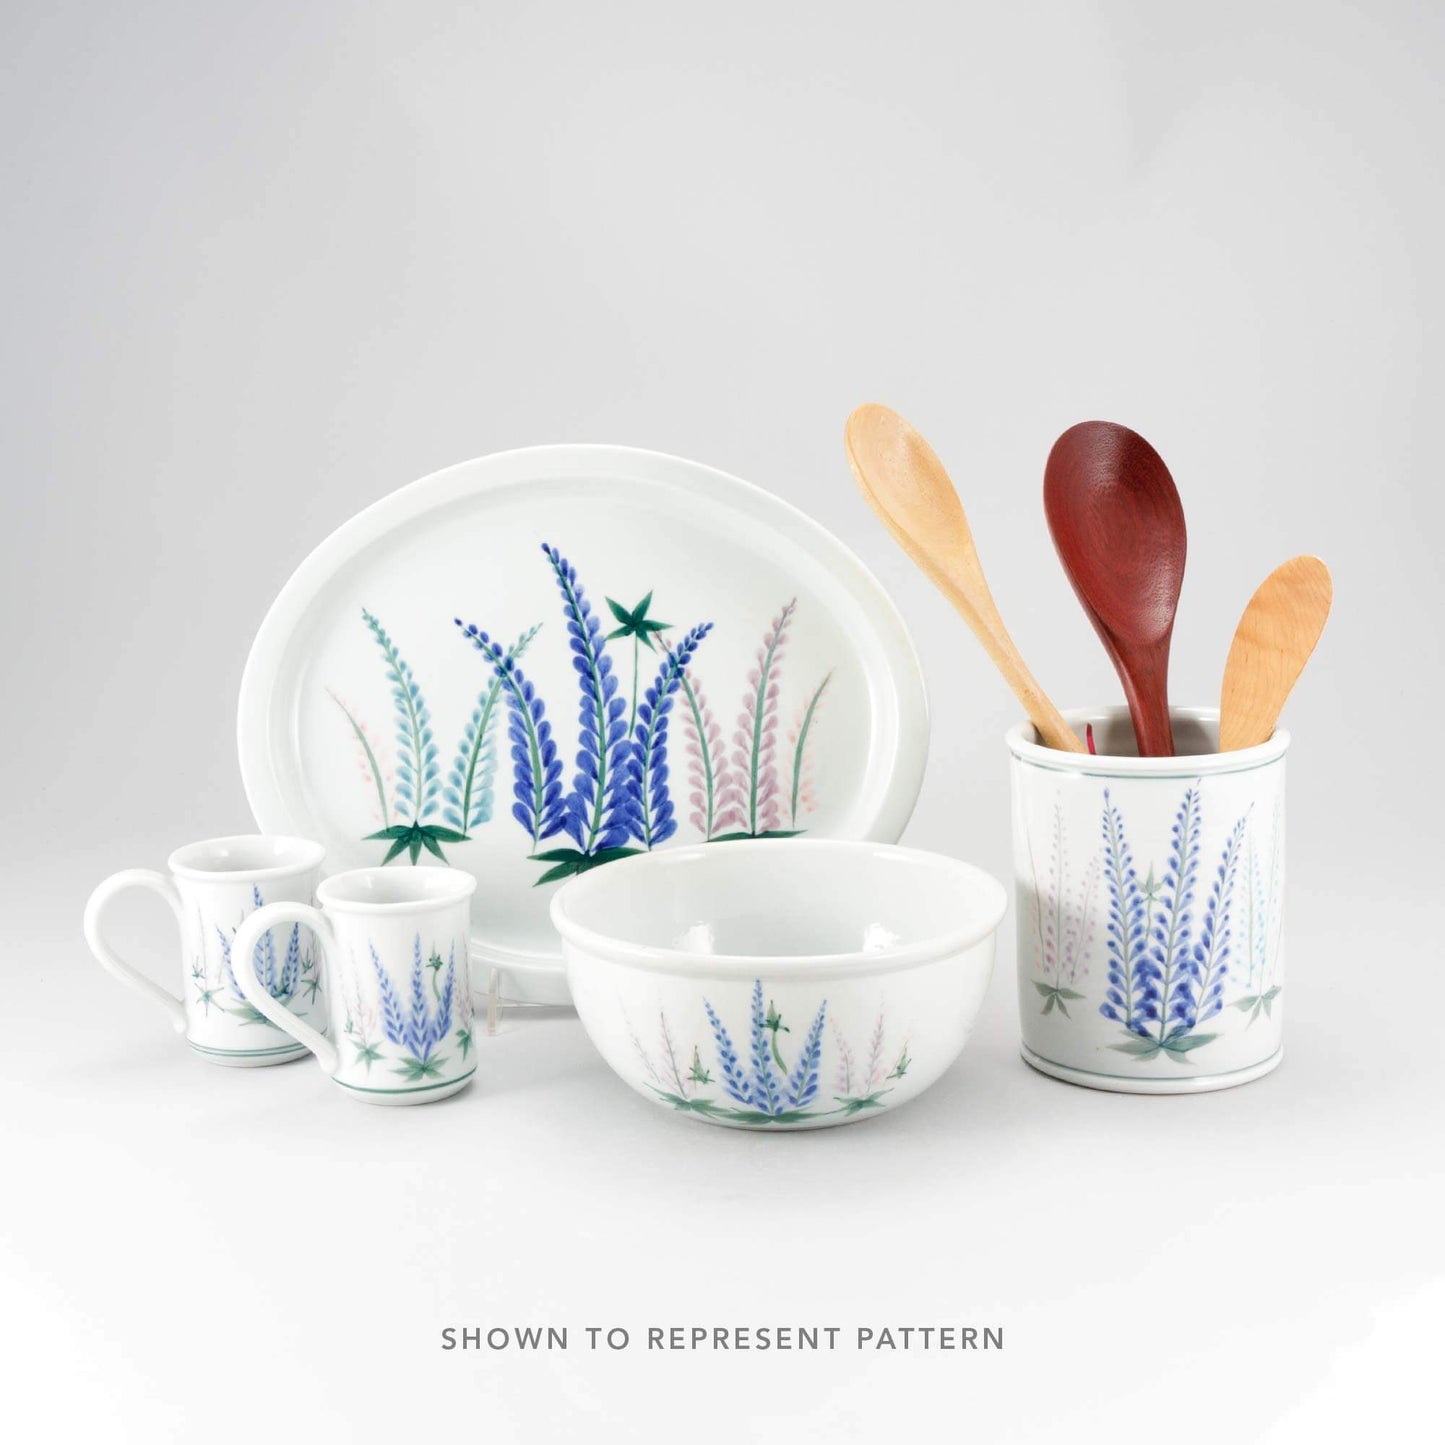 Handmade Pottery in Lupine pattern made by Georgetown Pottery in Maine